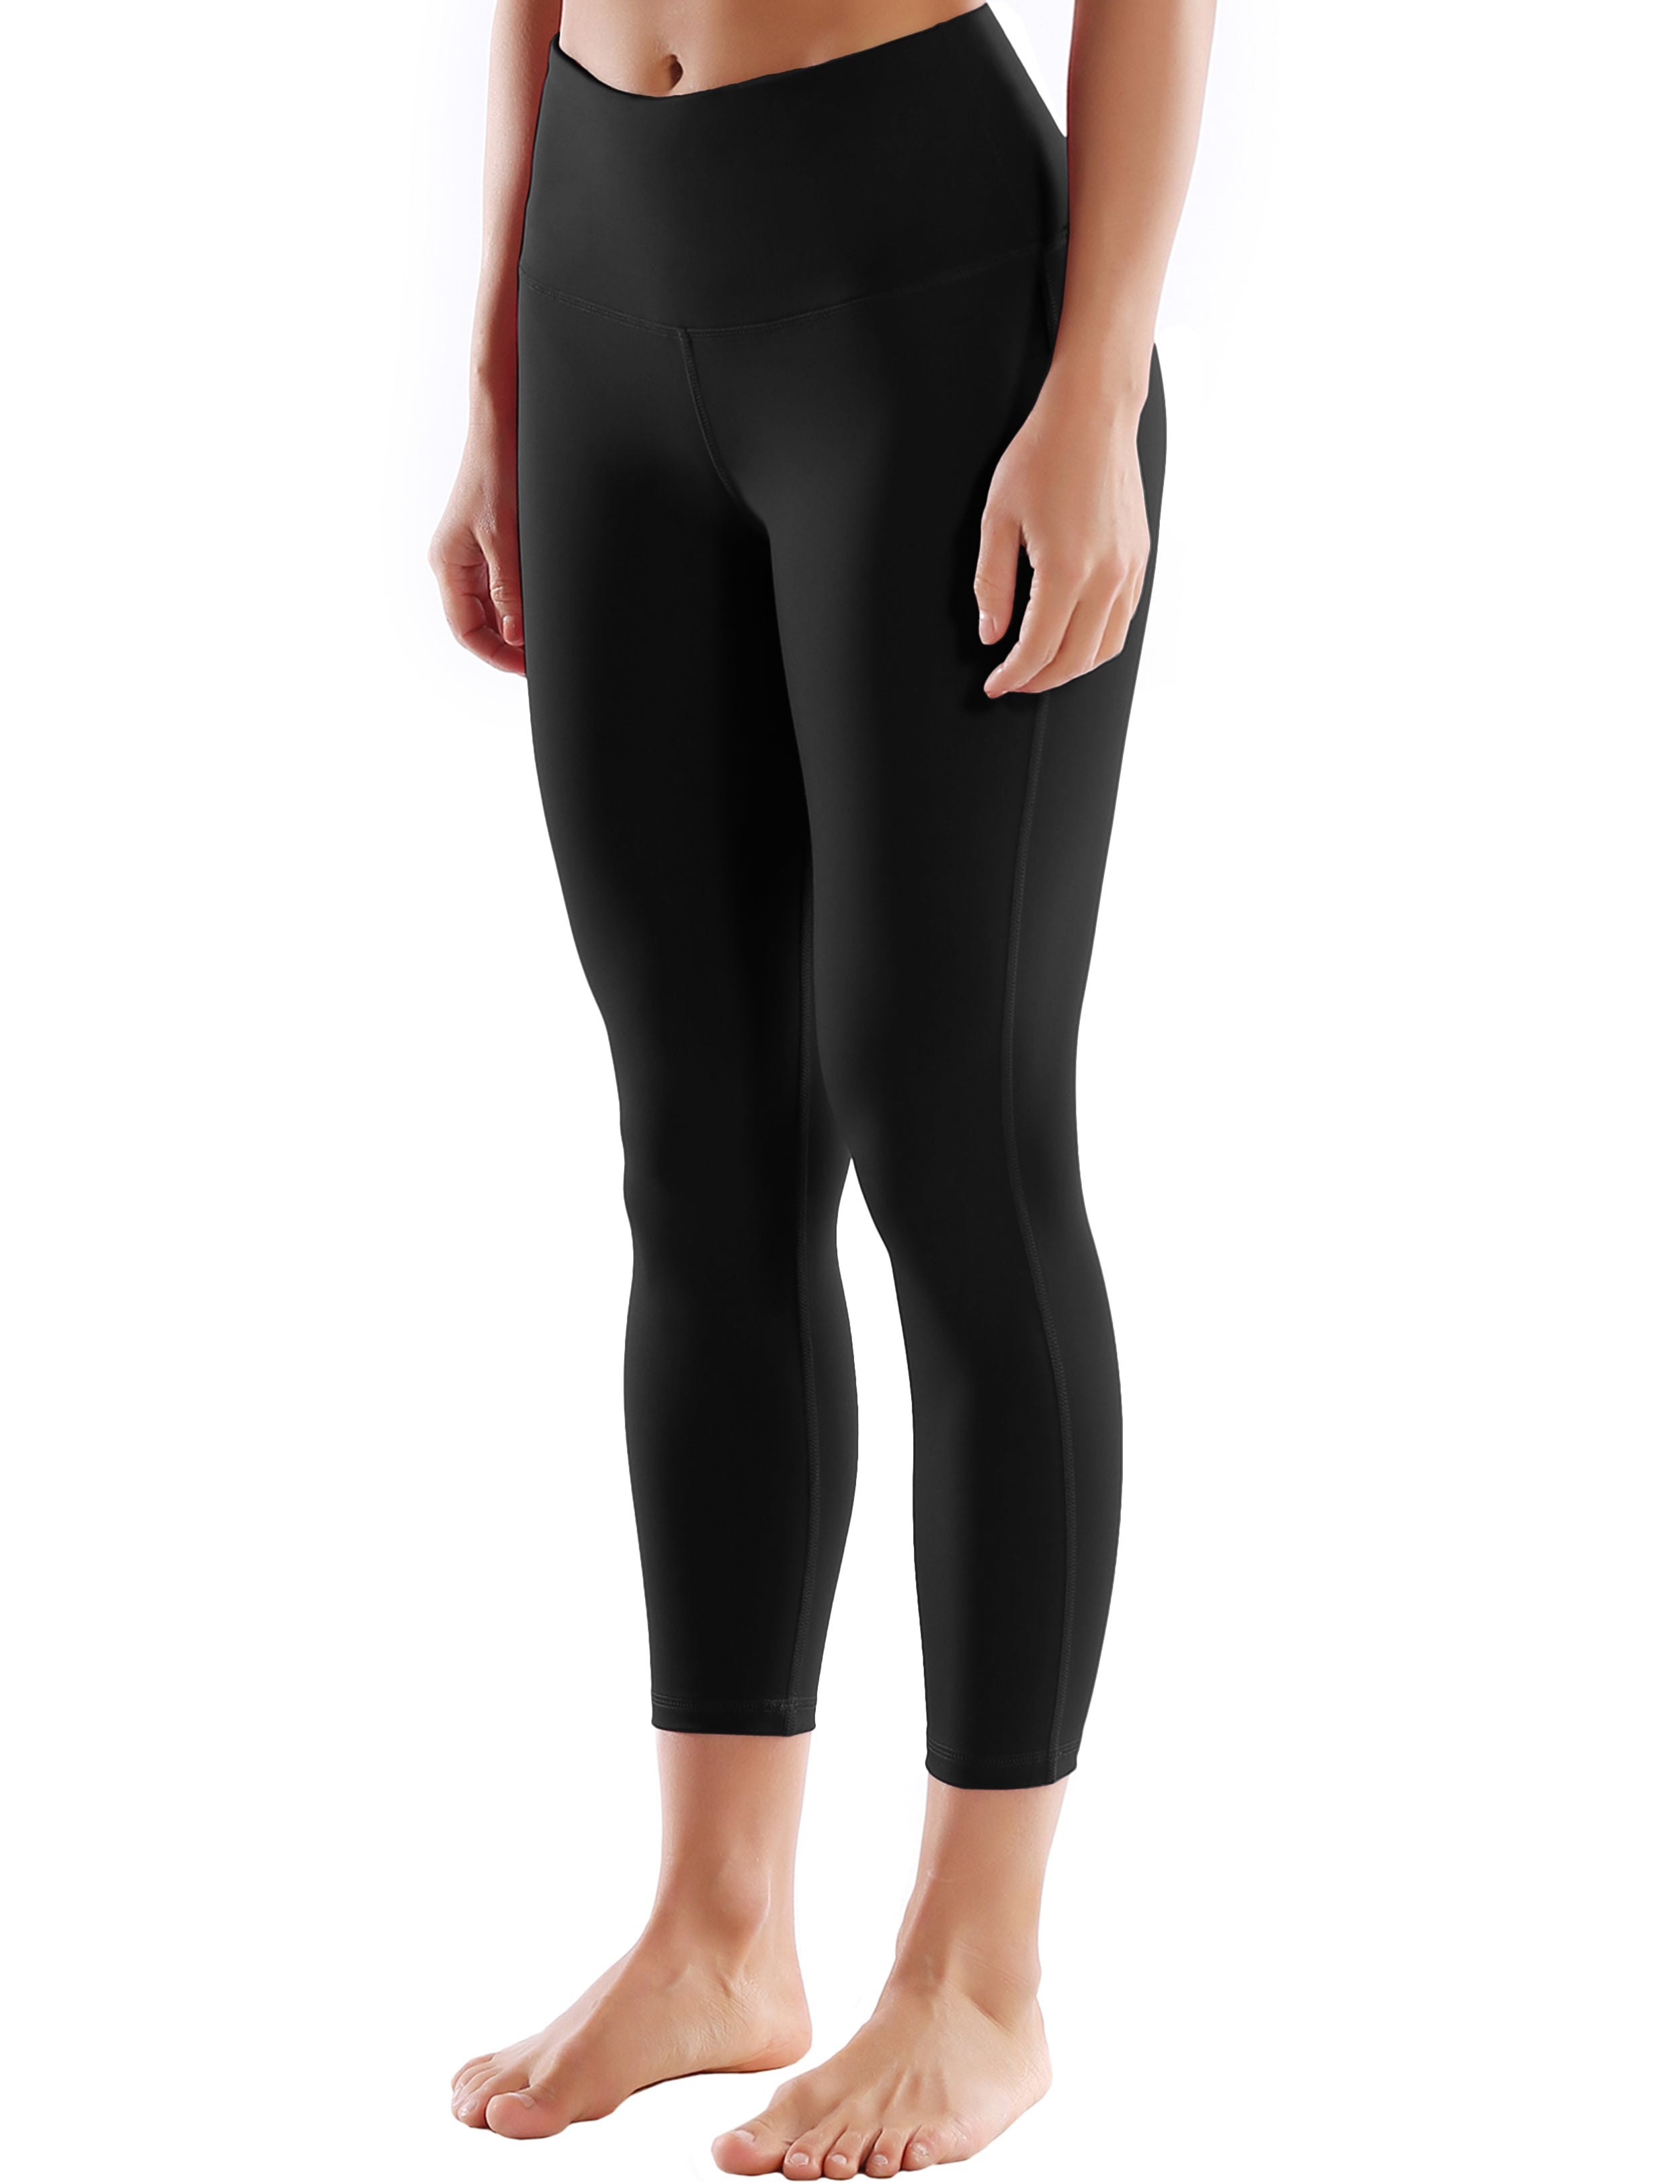 22" High Waist Side Line Capris black 75%Nylon/25%Spandex Fabric doesn't attract lint easily 4-way stretch No see-through Moisture-wicking Tummy control Inner pocket